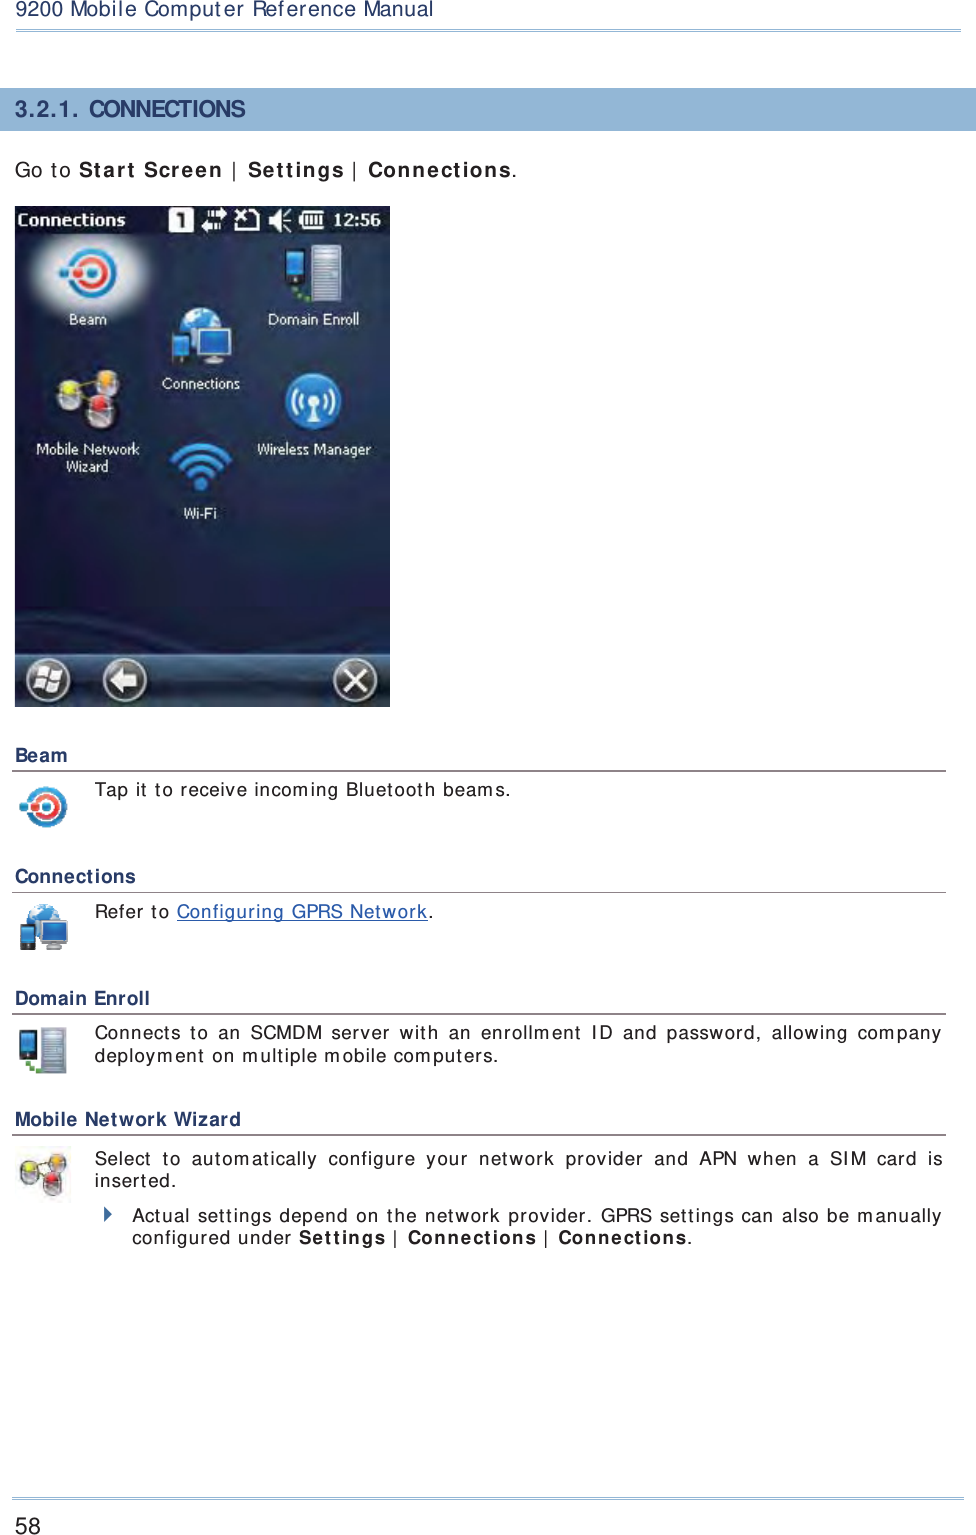 589200 Mobile Comput erRef erence Manual3.2. 1. CONNECTIONSGo to Star t  Scre en  |  Se t t in gs | Connect ions.  Beam  Tap it  to receive incom ing Bluetooth beam s. Connections Refer to Configuring GPRS Net work. Domain Enroll  Connect s t o an SCMDM server wit h an enr ollm ent I D and password, allowing com pany deploym ent on m ultiple m obile com puters. Mobile Network Wizard  Select t o aut om at ically configure your network provider and APN when a SI M car d is insert ed. Actual set t ings depend on the net work provider. GPRS set tings can also be m anually configured under Se t t in gs |  Conne ct ion s |  Conne ct ion s. 